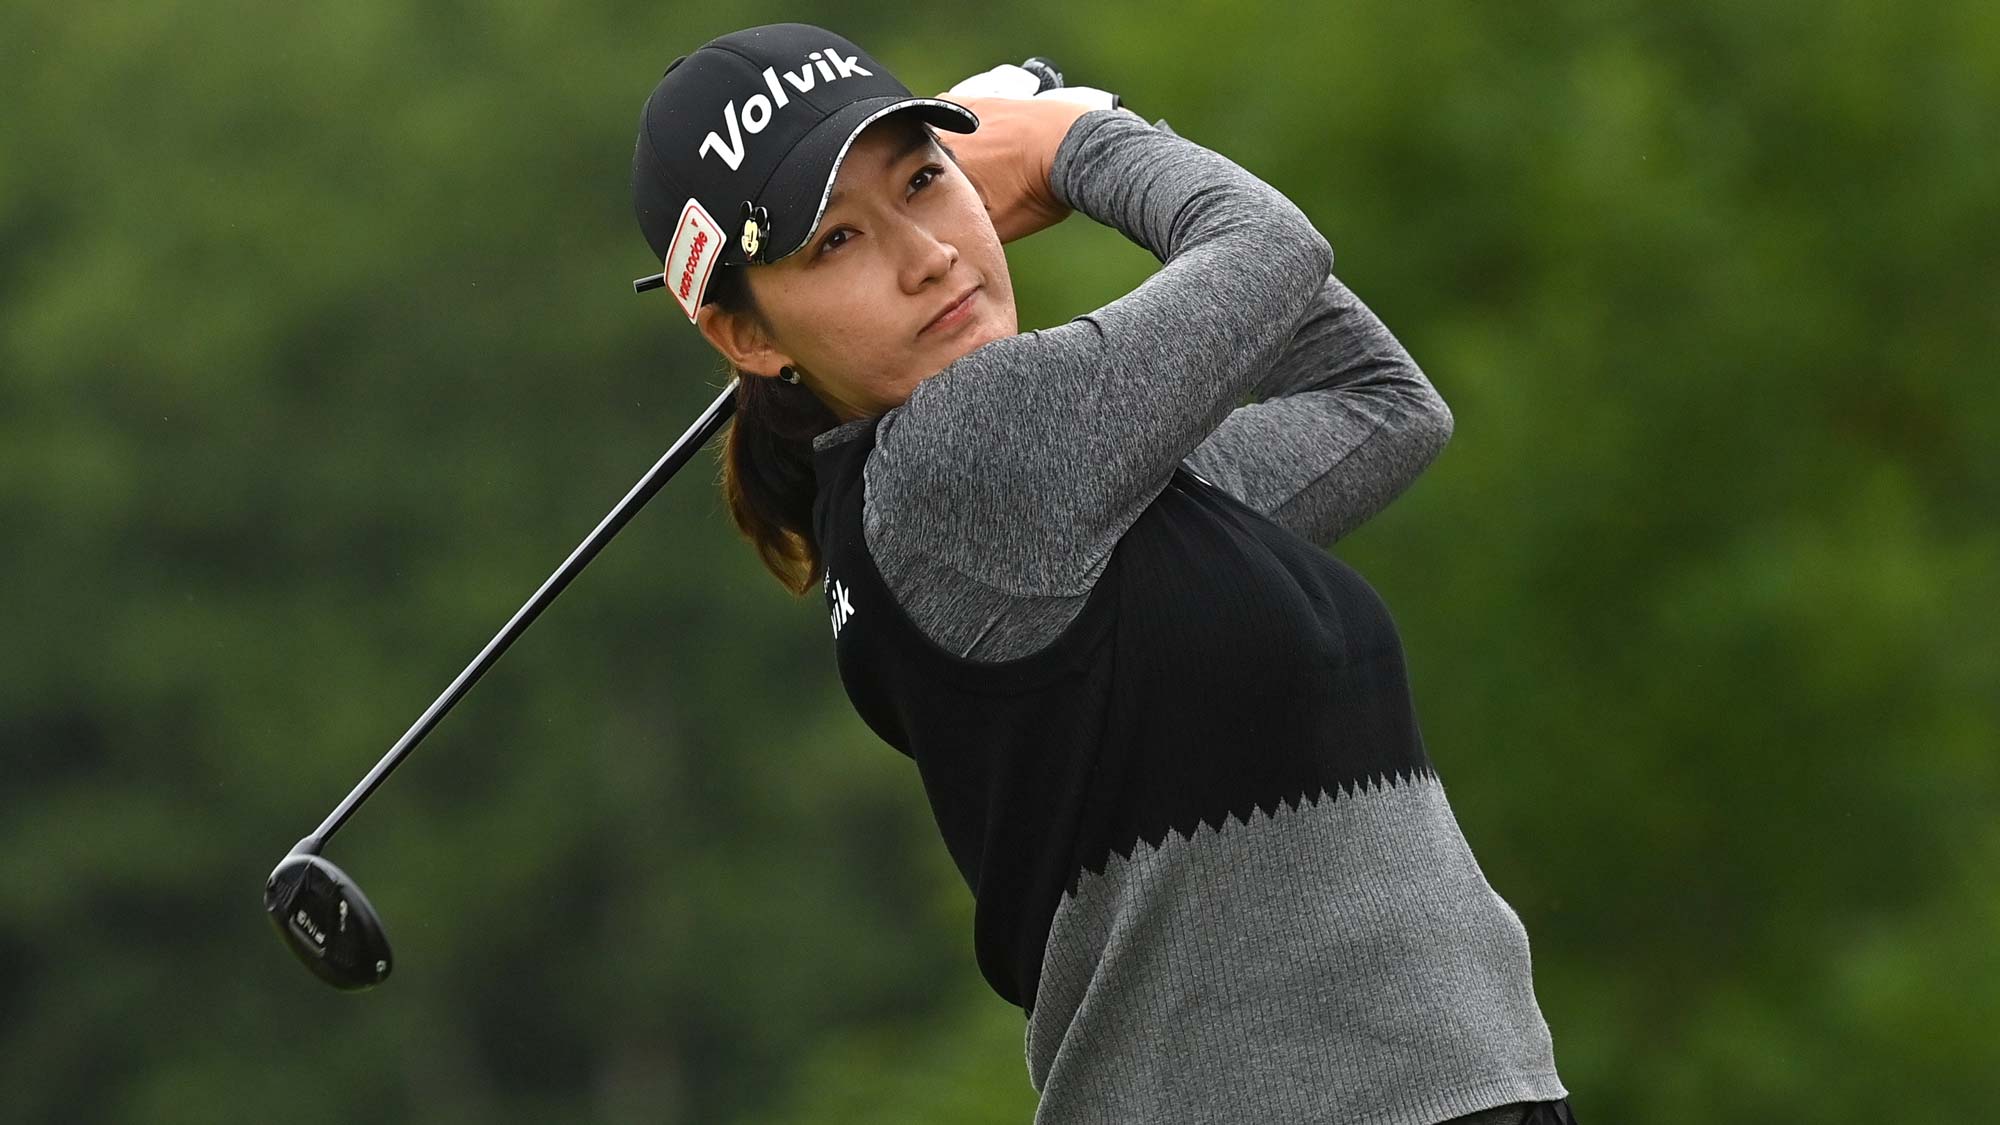 Chella Choi of Korea tees off during the first round of The ISPS HANDA World Invitational